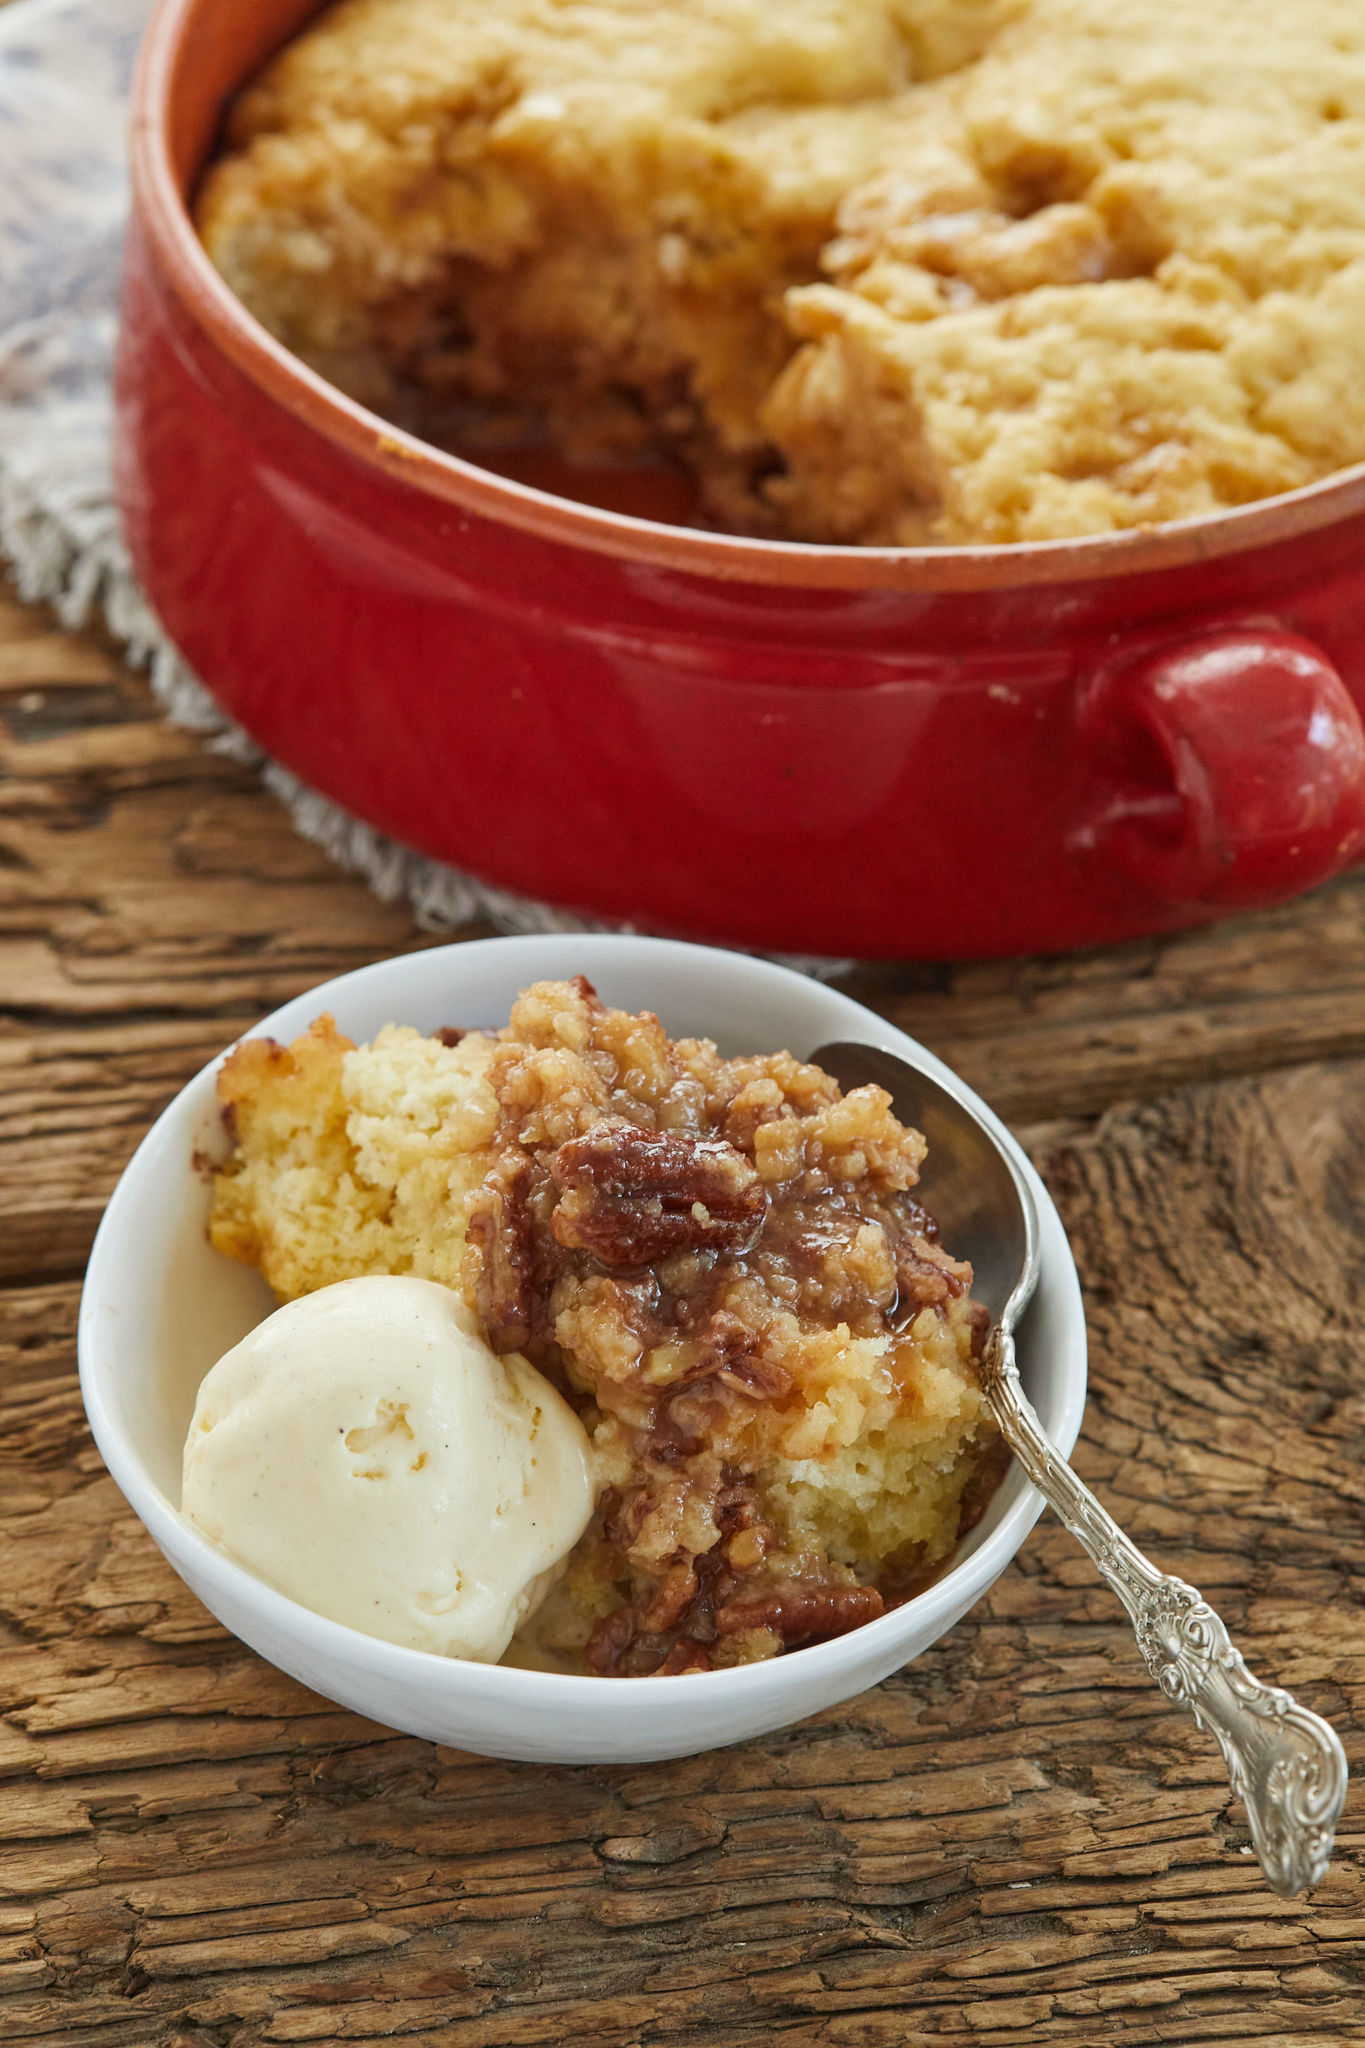 Self saucing pecan cobbler served in a bowl with ice cream.